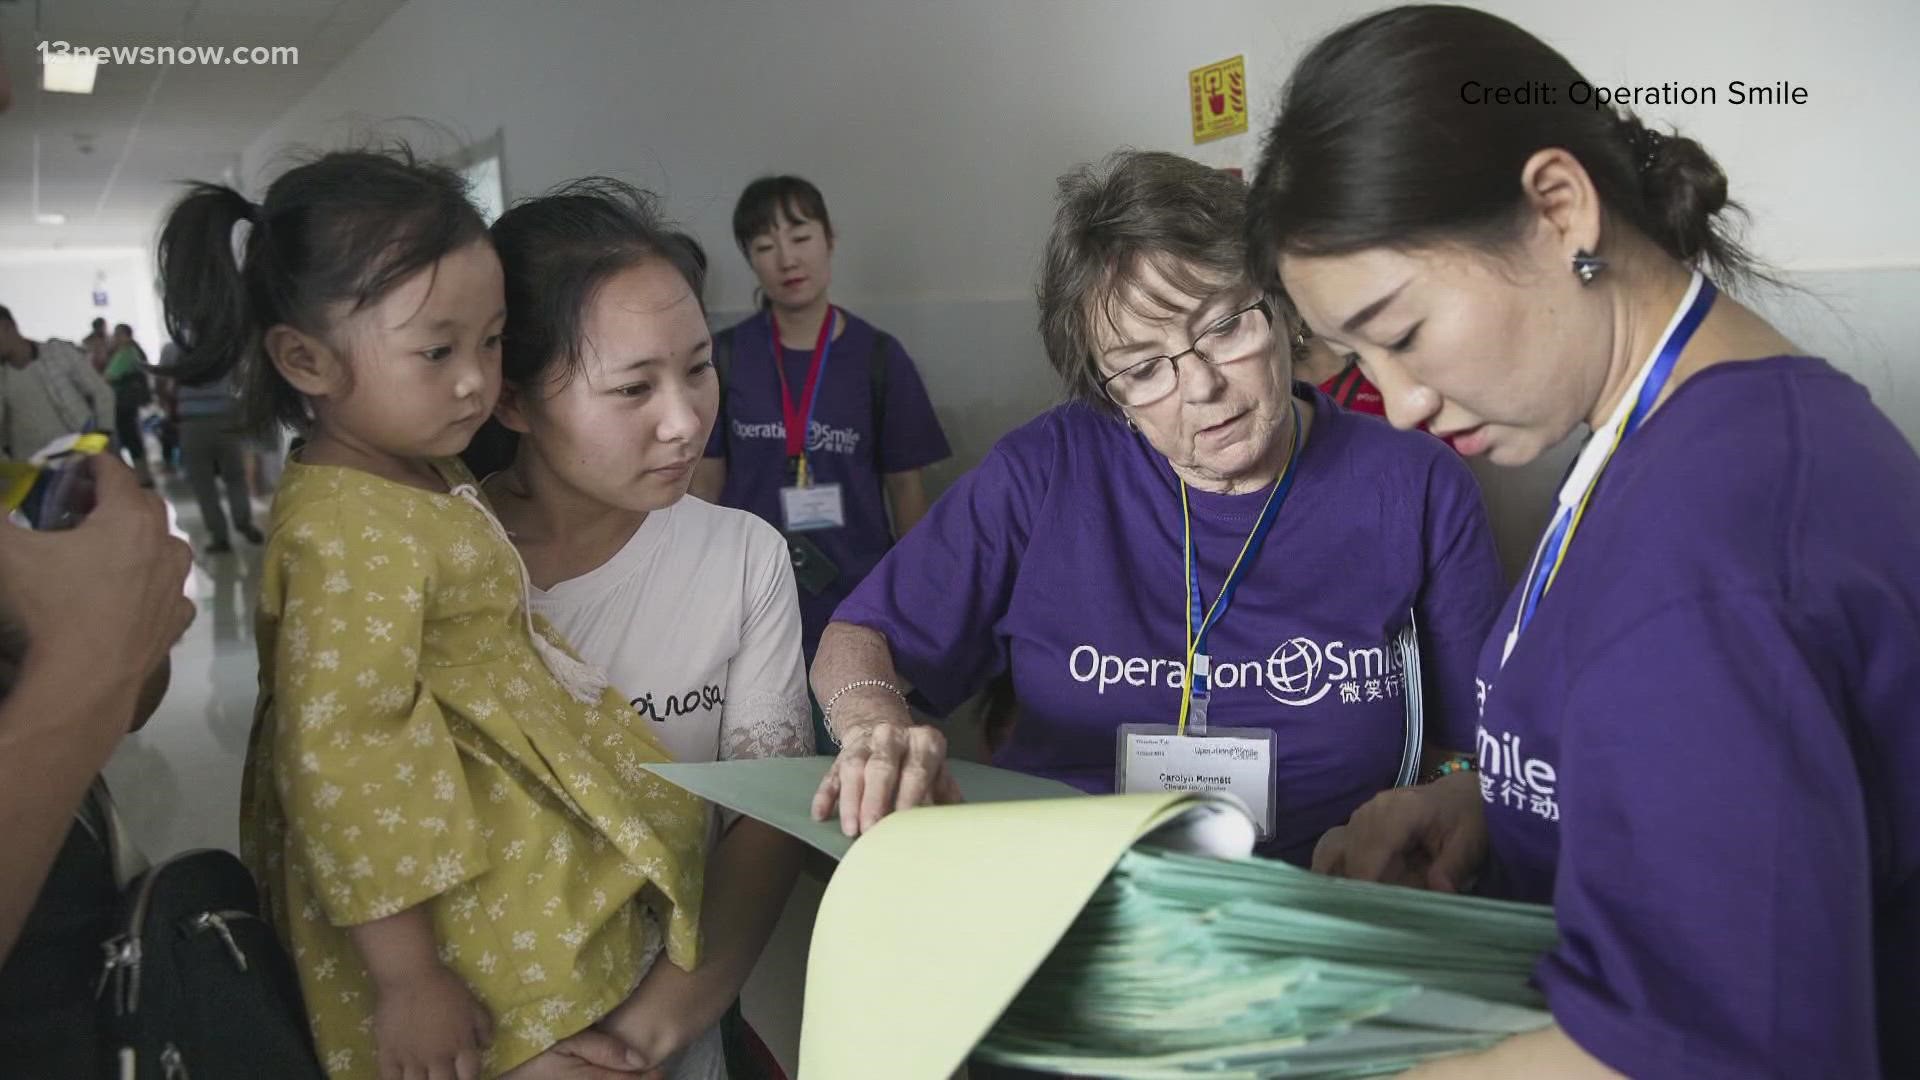 Leaders with Operation Smile said these volunteers are a pivotal key in caring for families in other countries. Now, they want to encourage more to join.